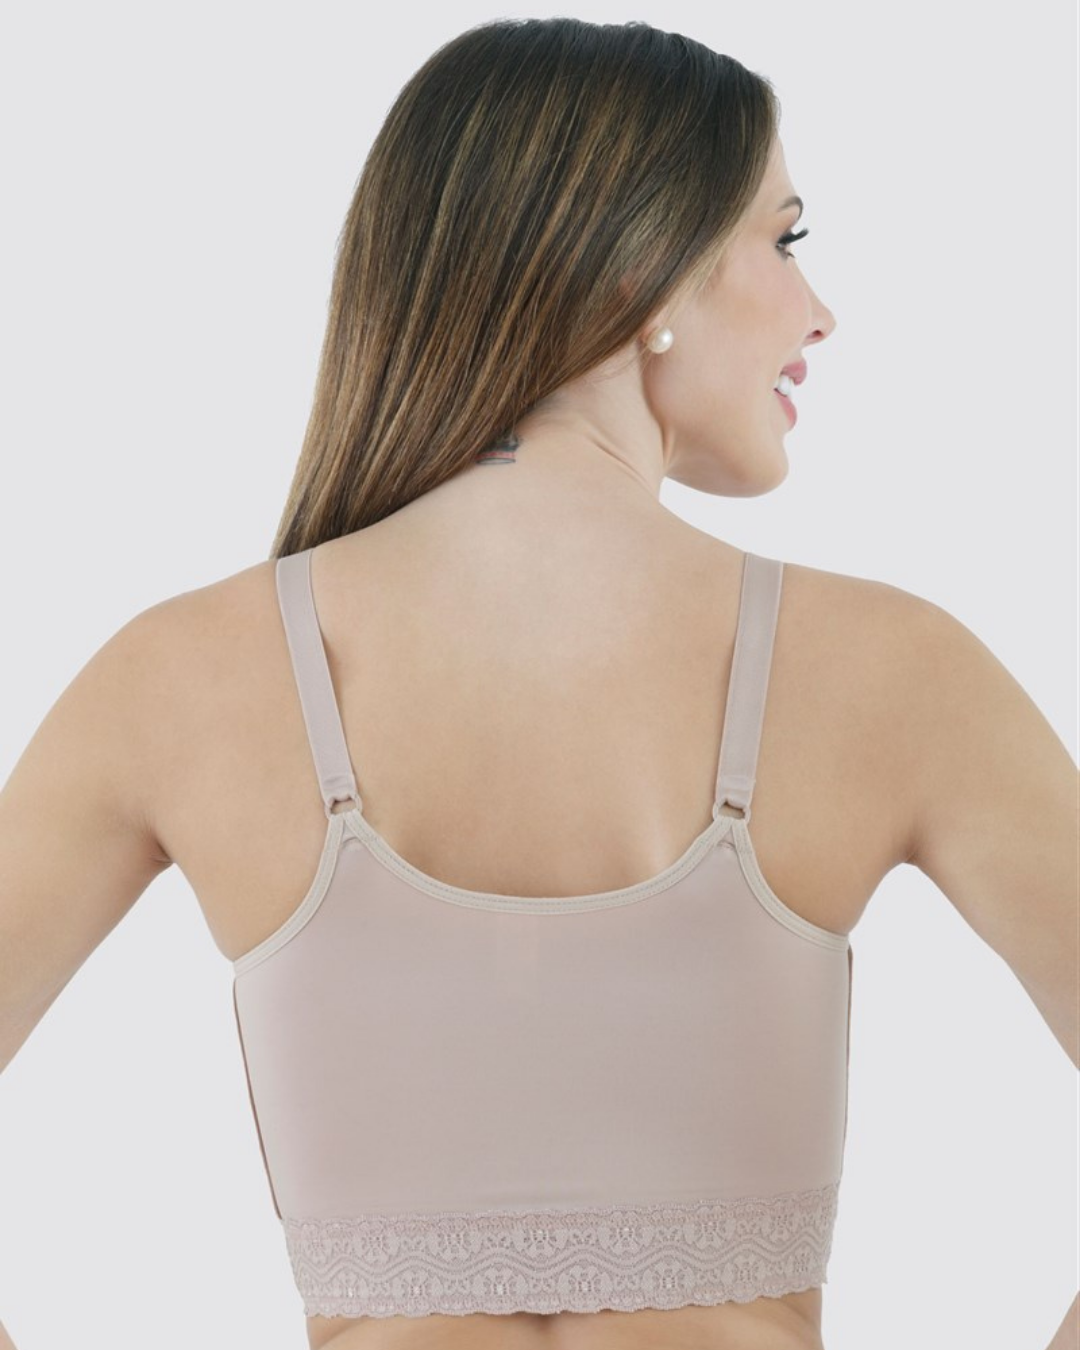 Macom Second Stage Bra – The Fitting Service